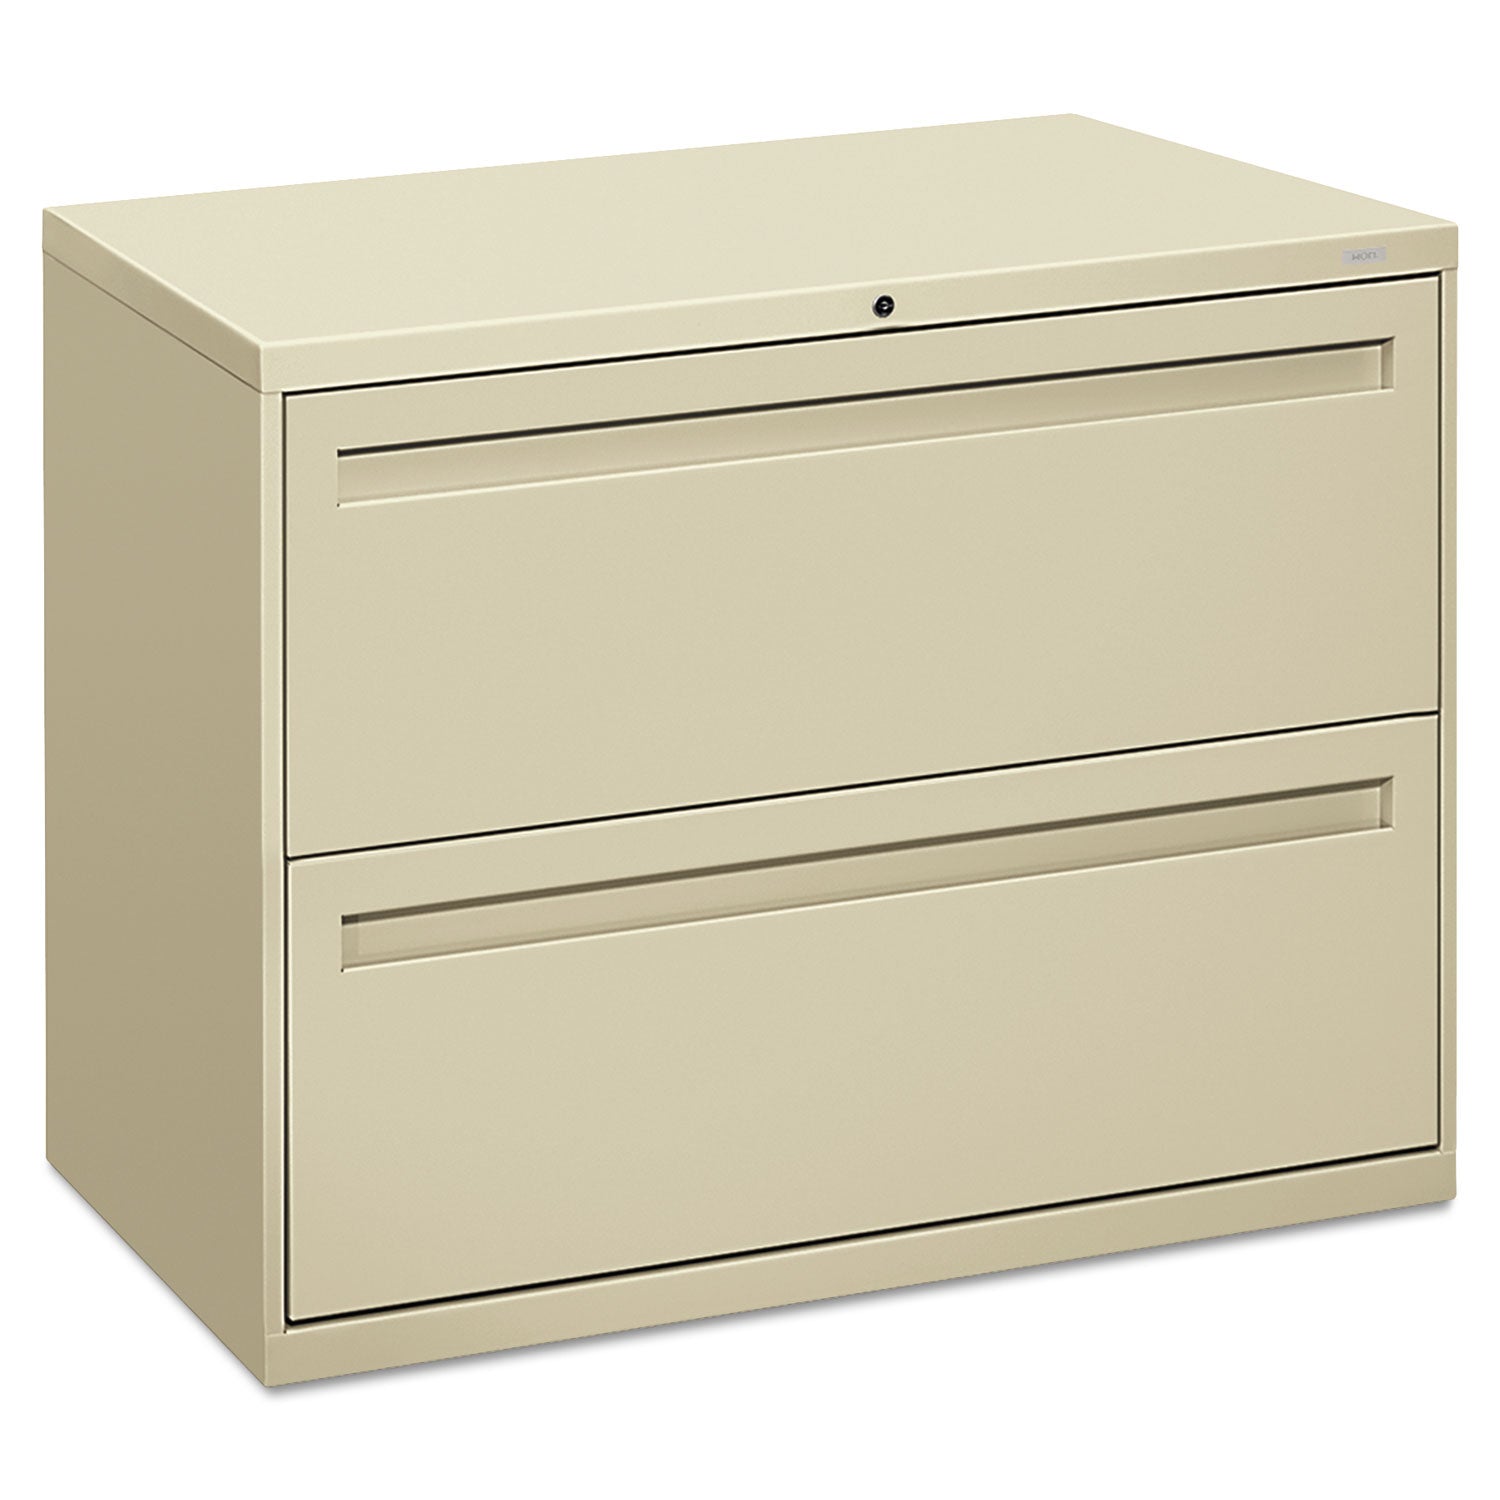 Brigade 700 Series Lateral File, 2 Legal/Letter-Size File Drawers, Putty, 36" x 18" x 28 - 